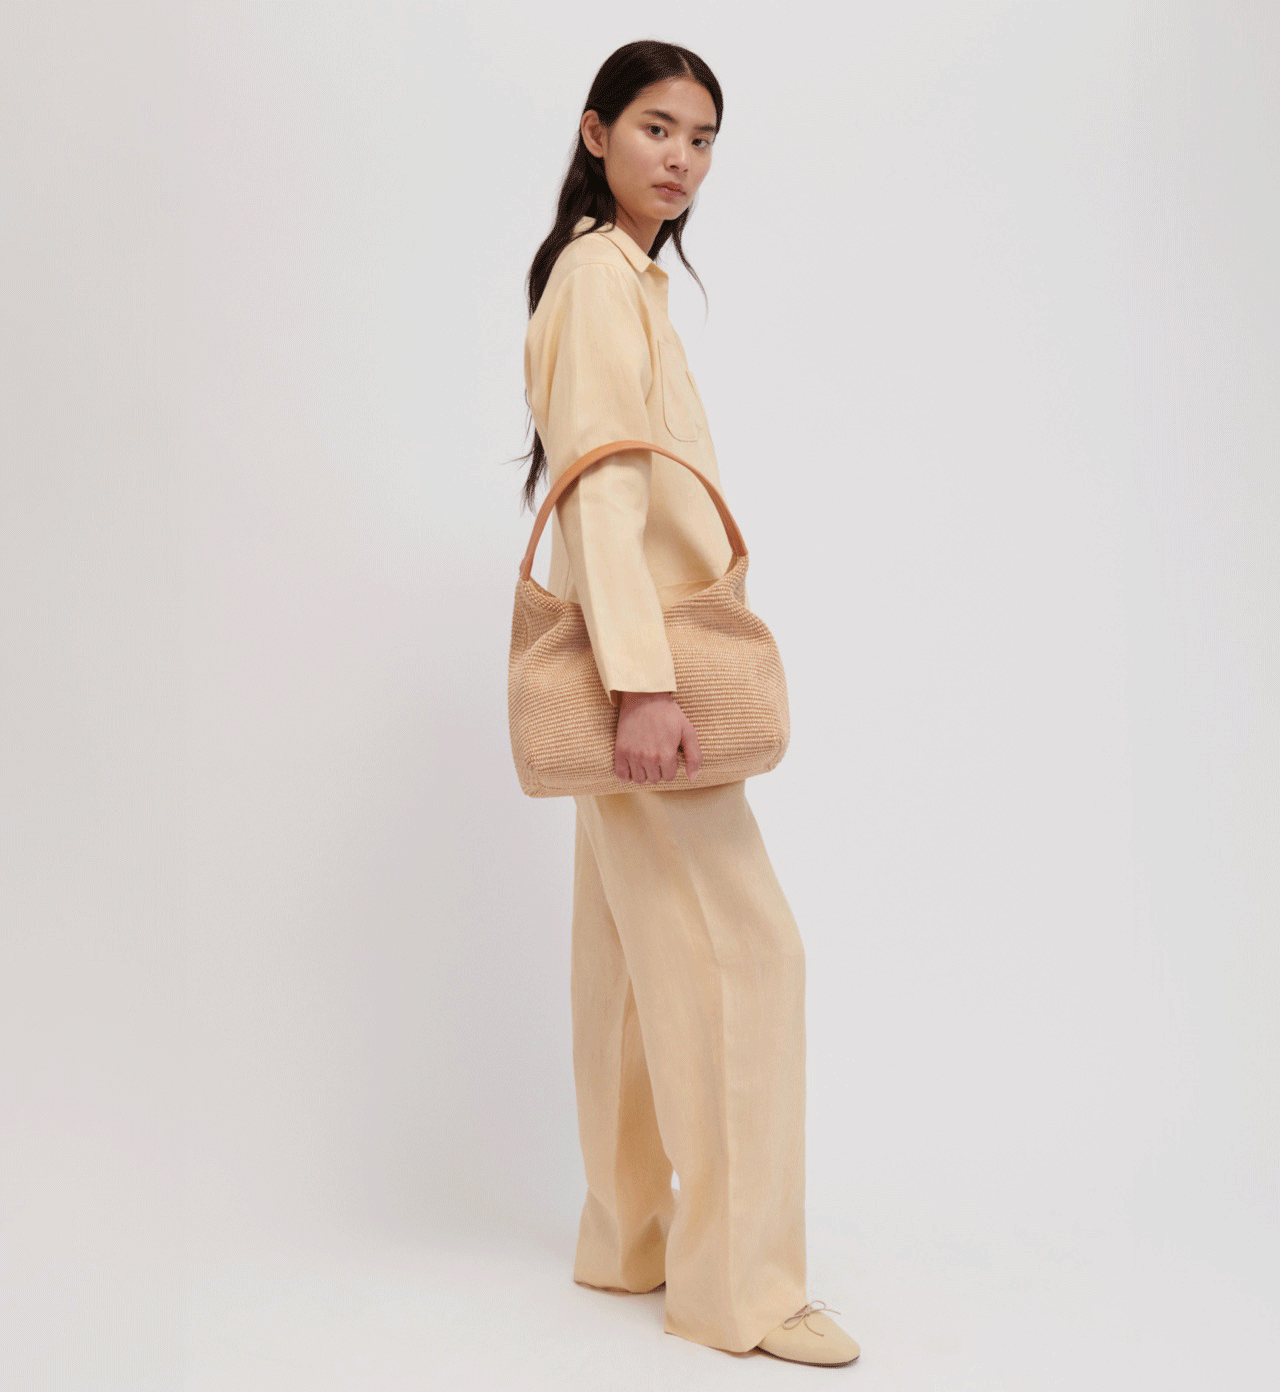 Shop the Candy Hobo in Natural Raffia.